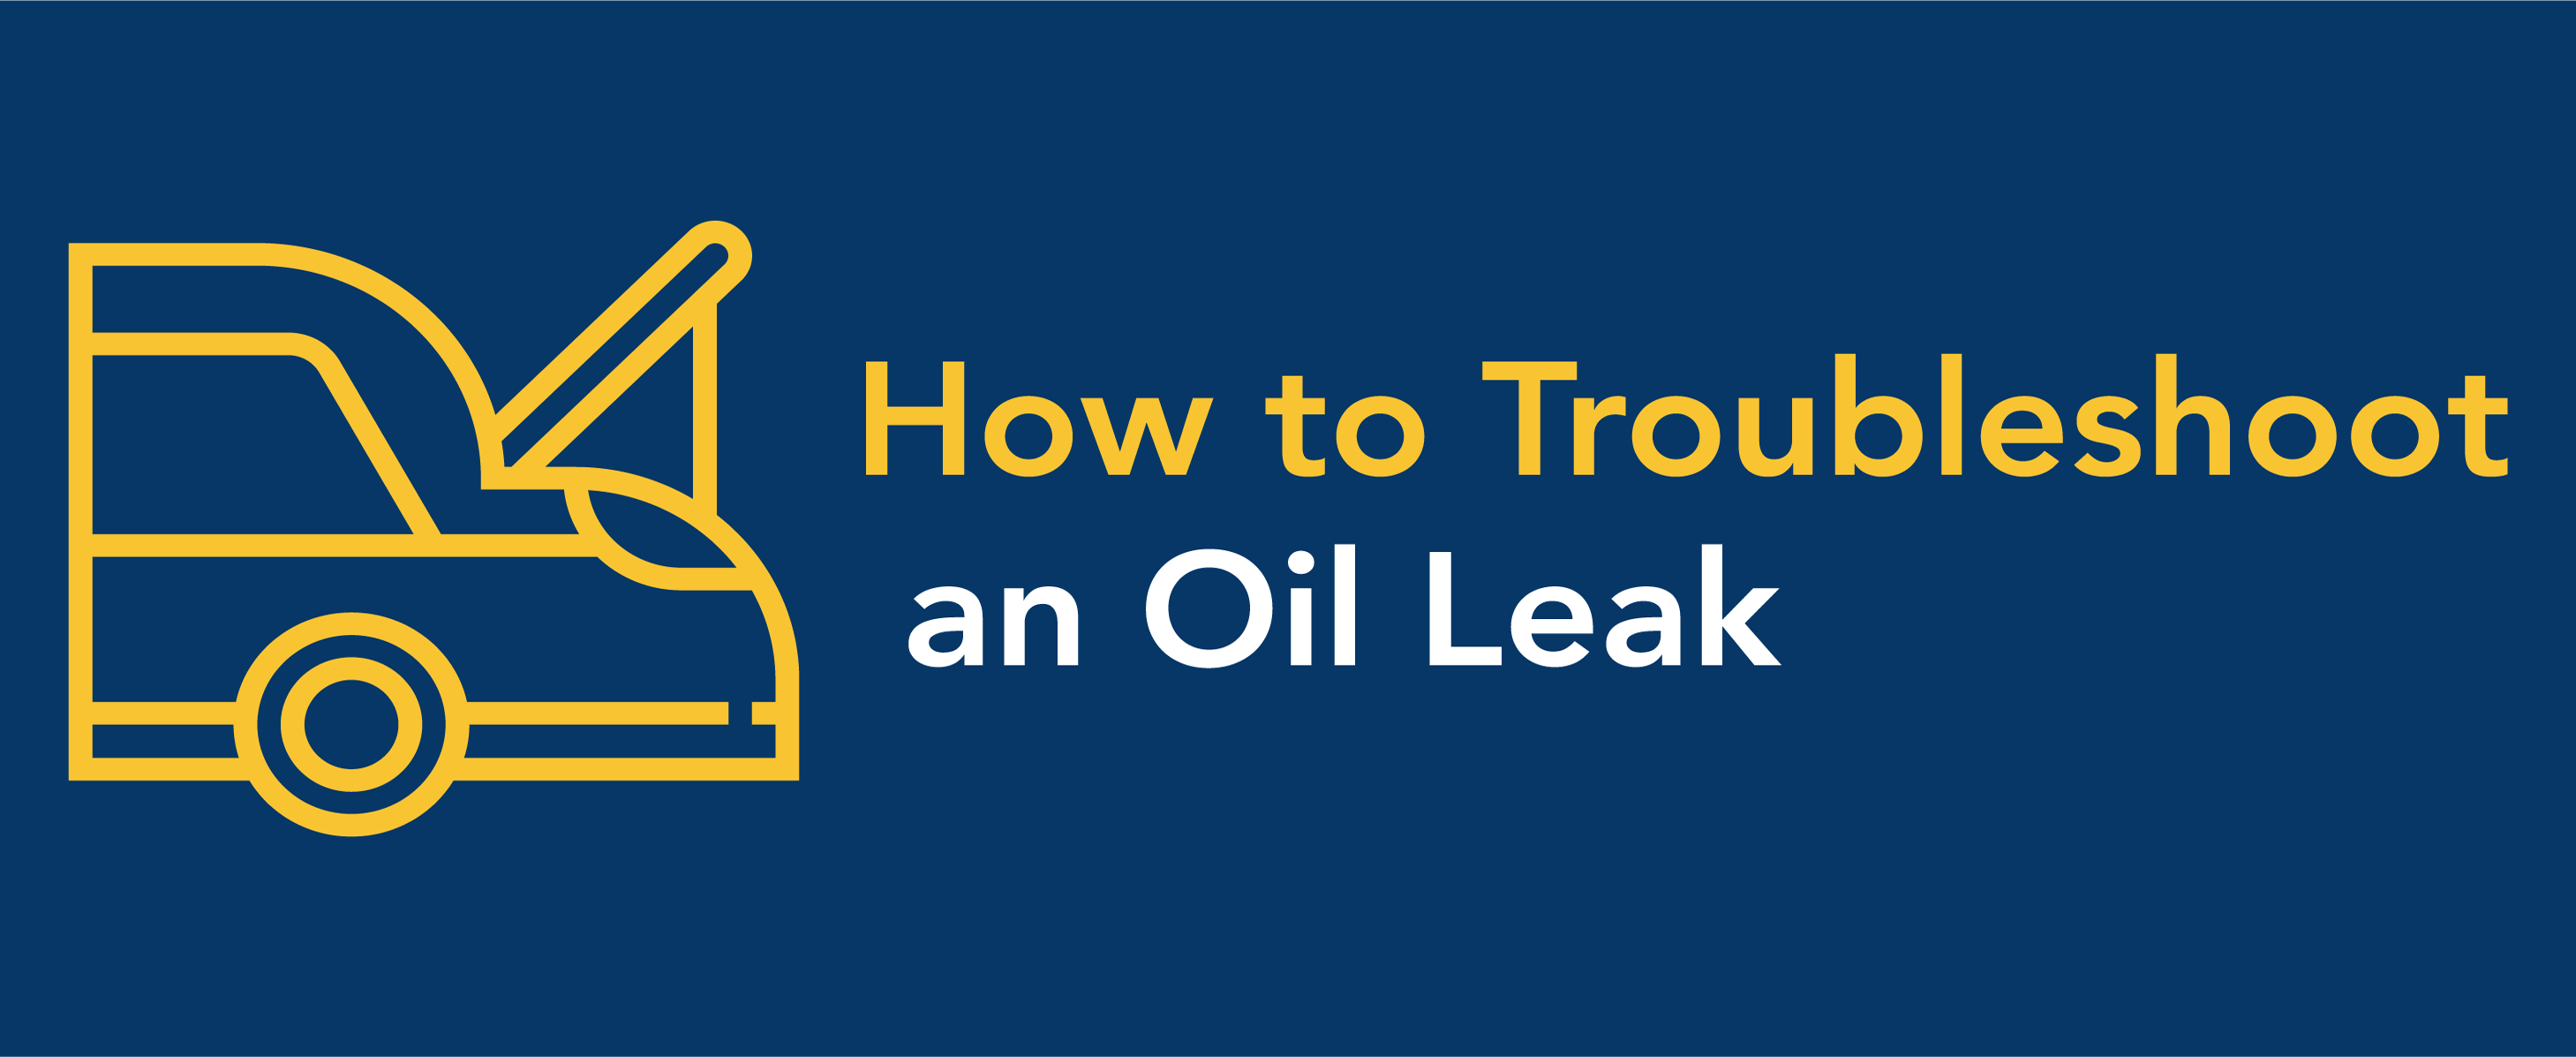 How to troubleshoot an oil leak.